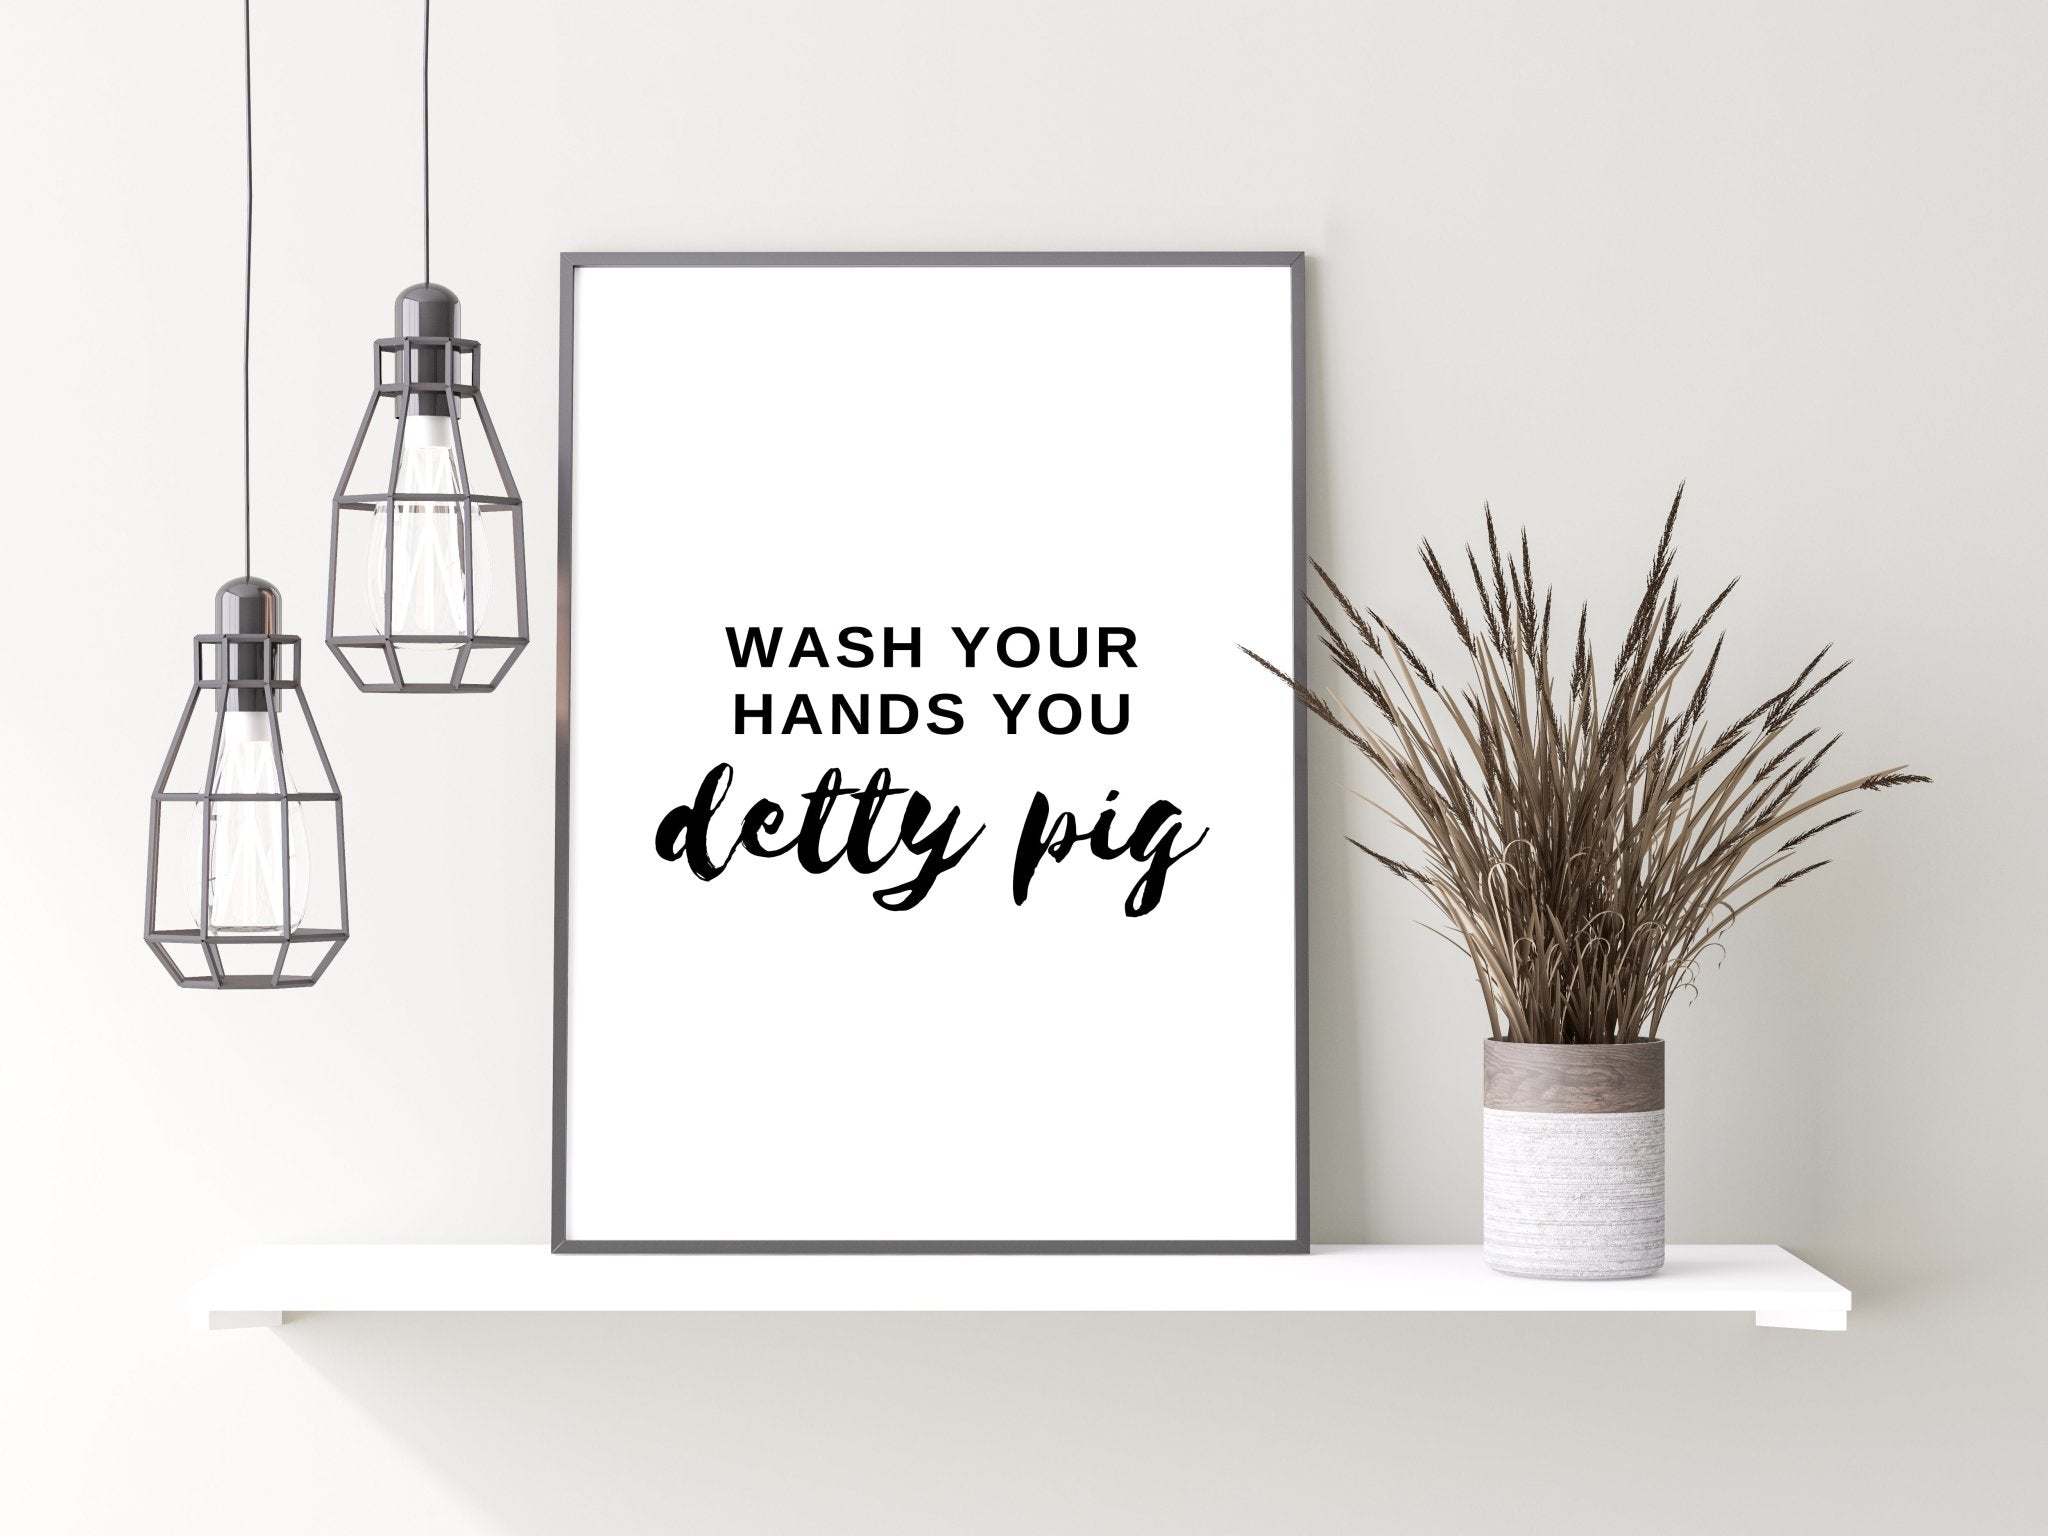 Wash Your Hands You Detty Pig Print